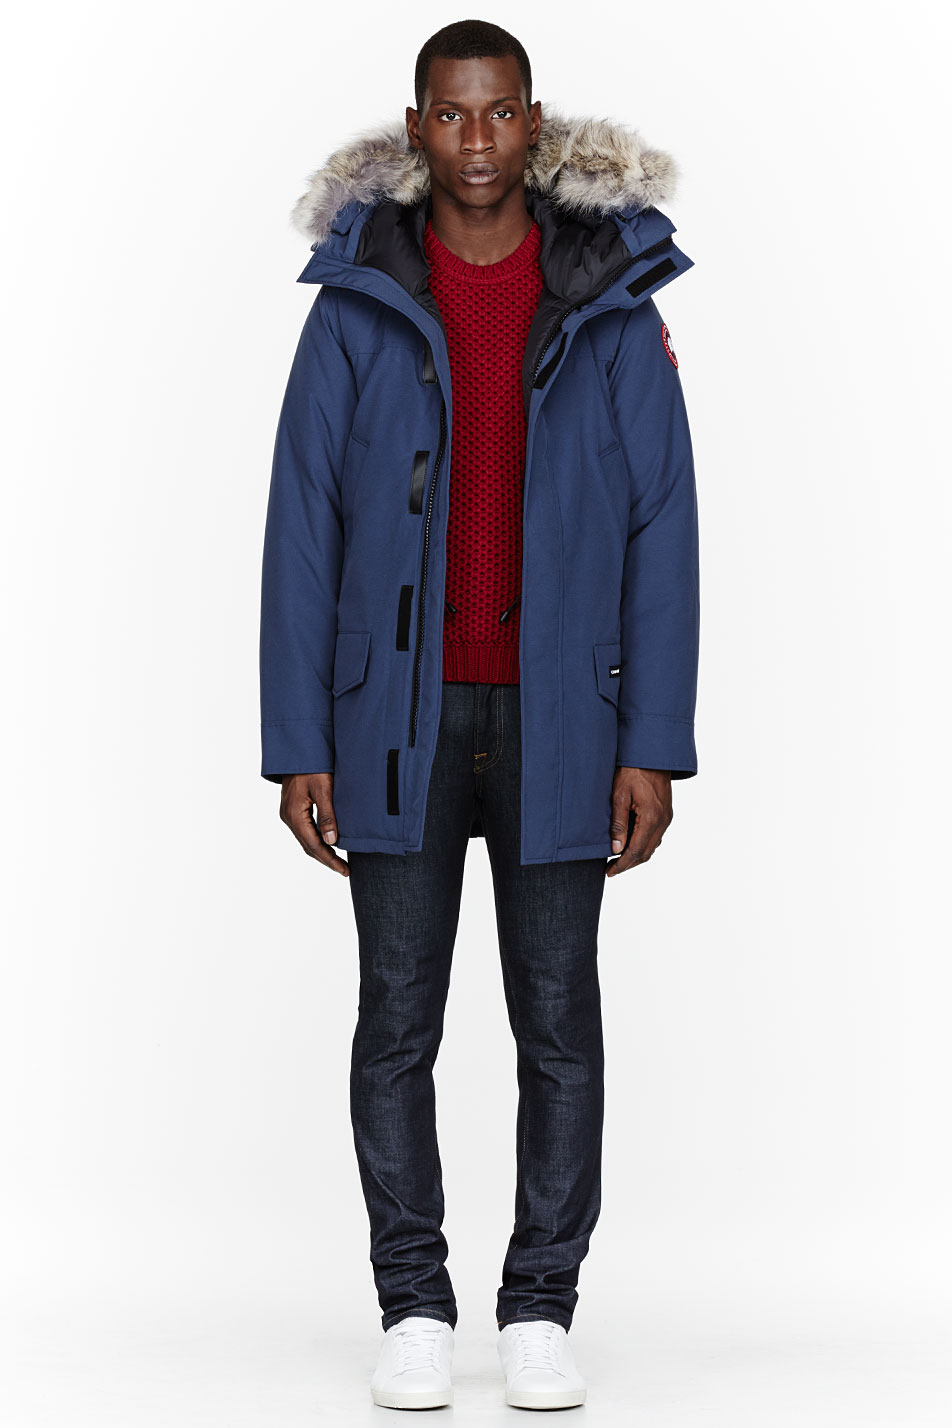 Lyst - Canada Goose Navy Blue Down and Fur Langford Parka in Blue for Men